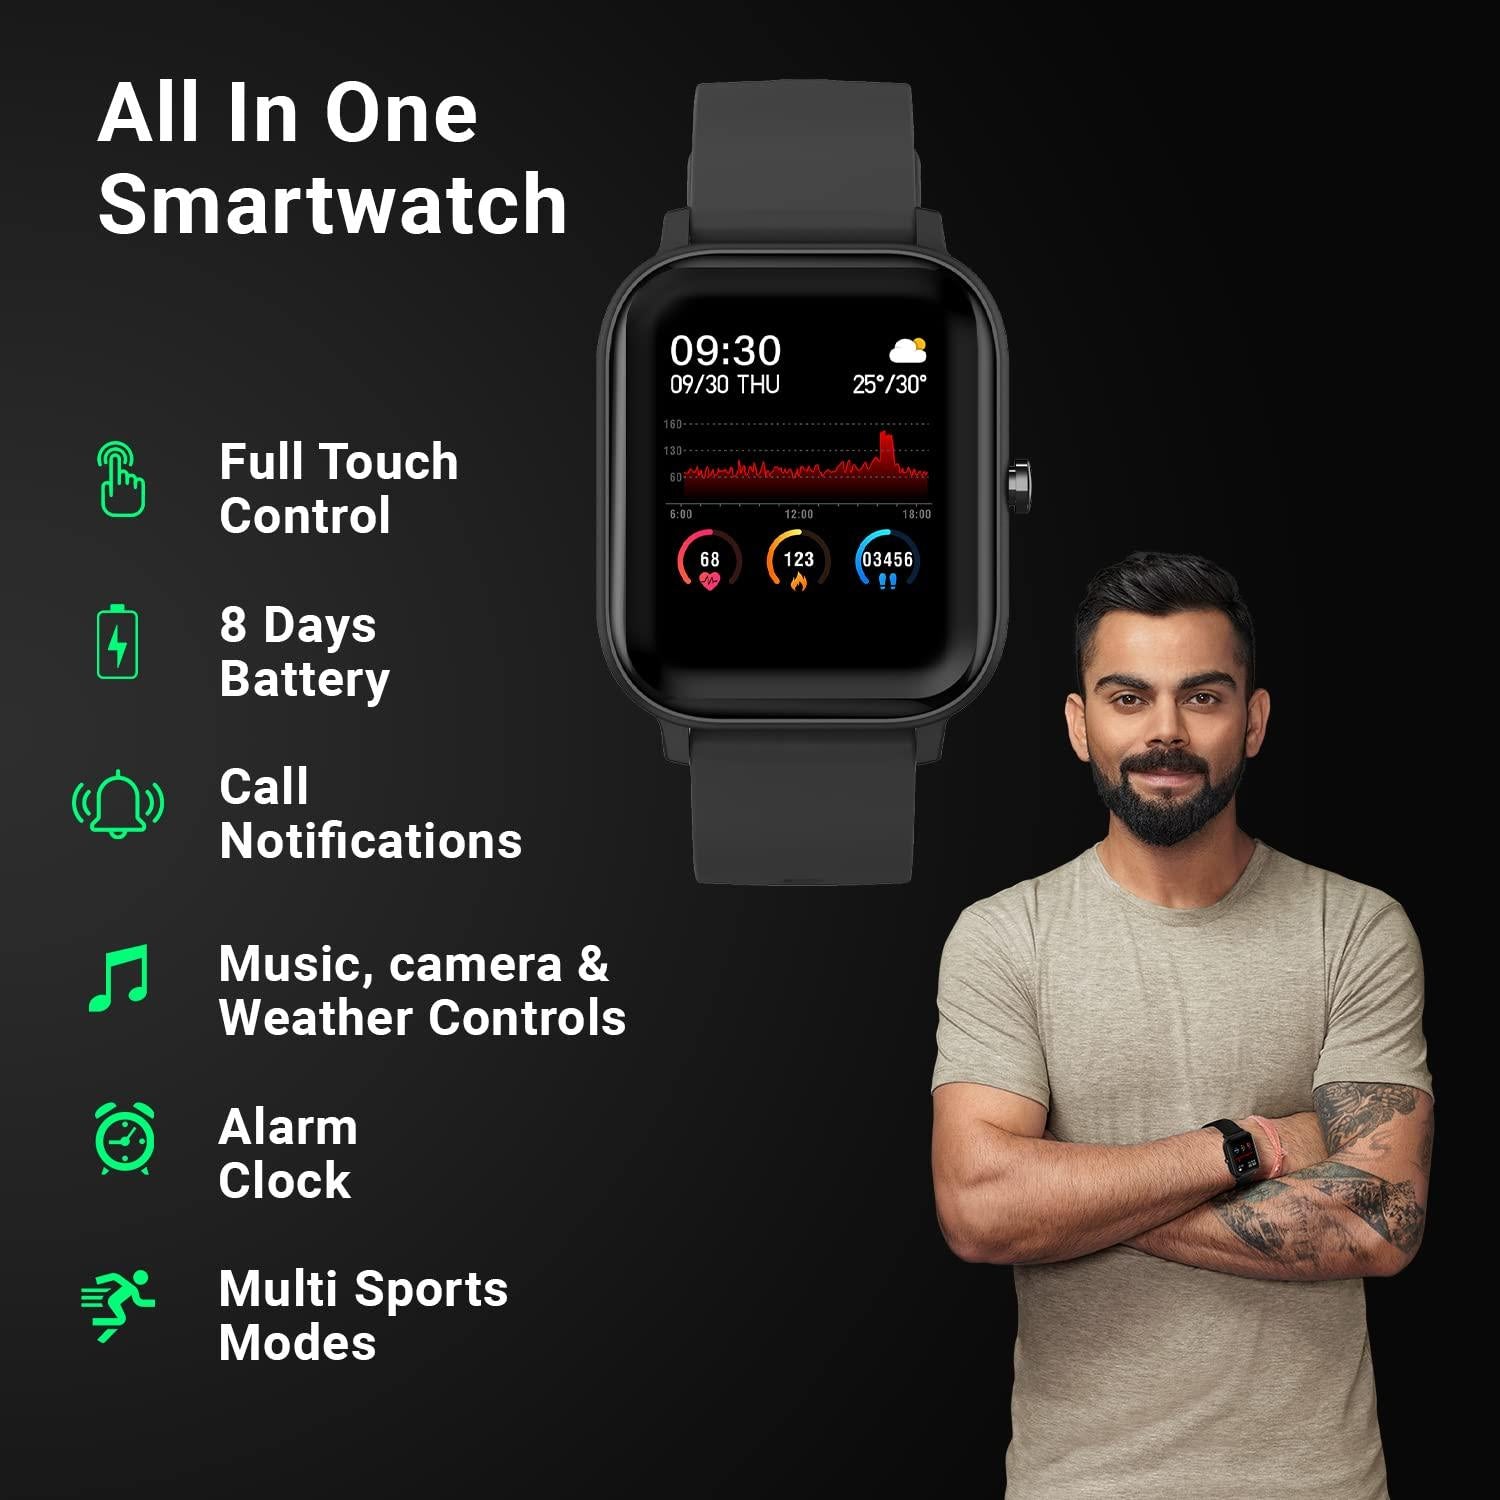 Fire-Boltt SpO2 Full Touch 1.4 inch Smart Watch 400 Nits Peak Brightness Metal Body 8 Days Battery Life with 24*7 Heart Rate monitoring IPX7 with Blood Oxygen, Fitness, Sports & Sleep Tracking (Black) - A - onBeli